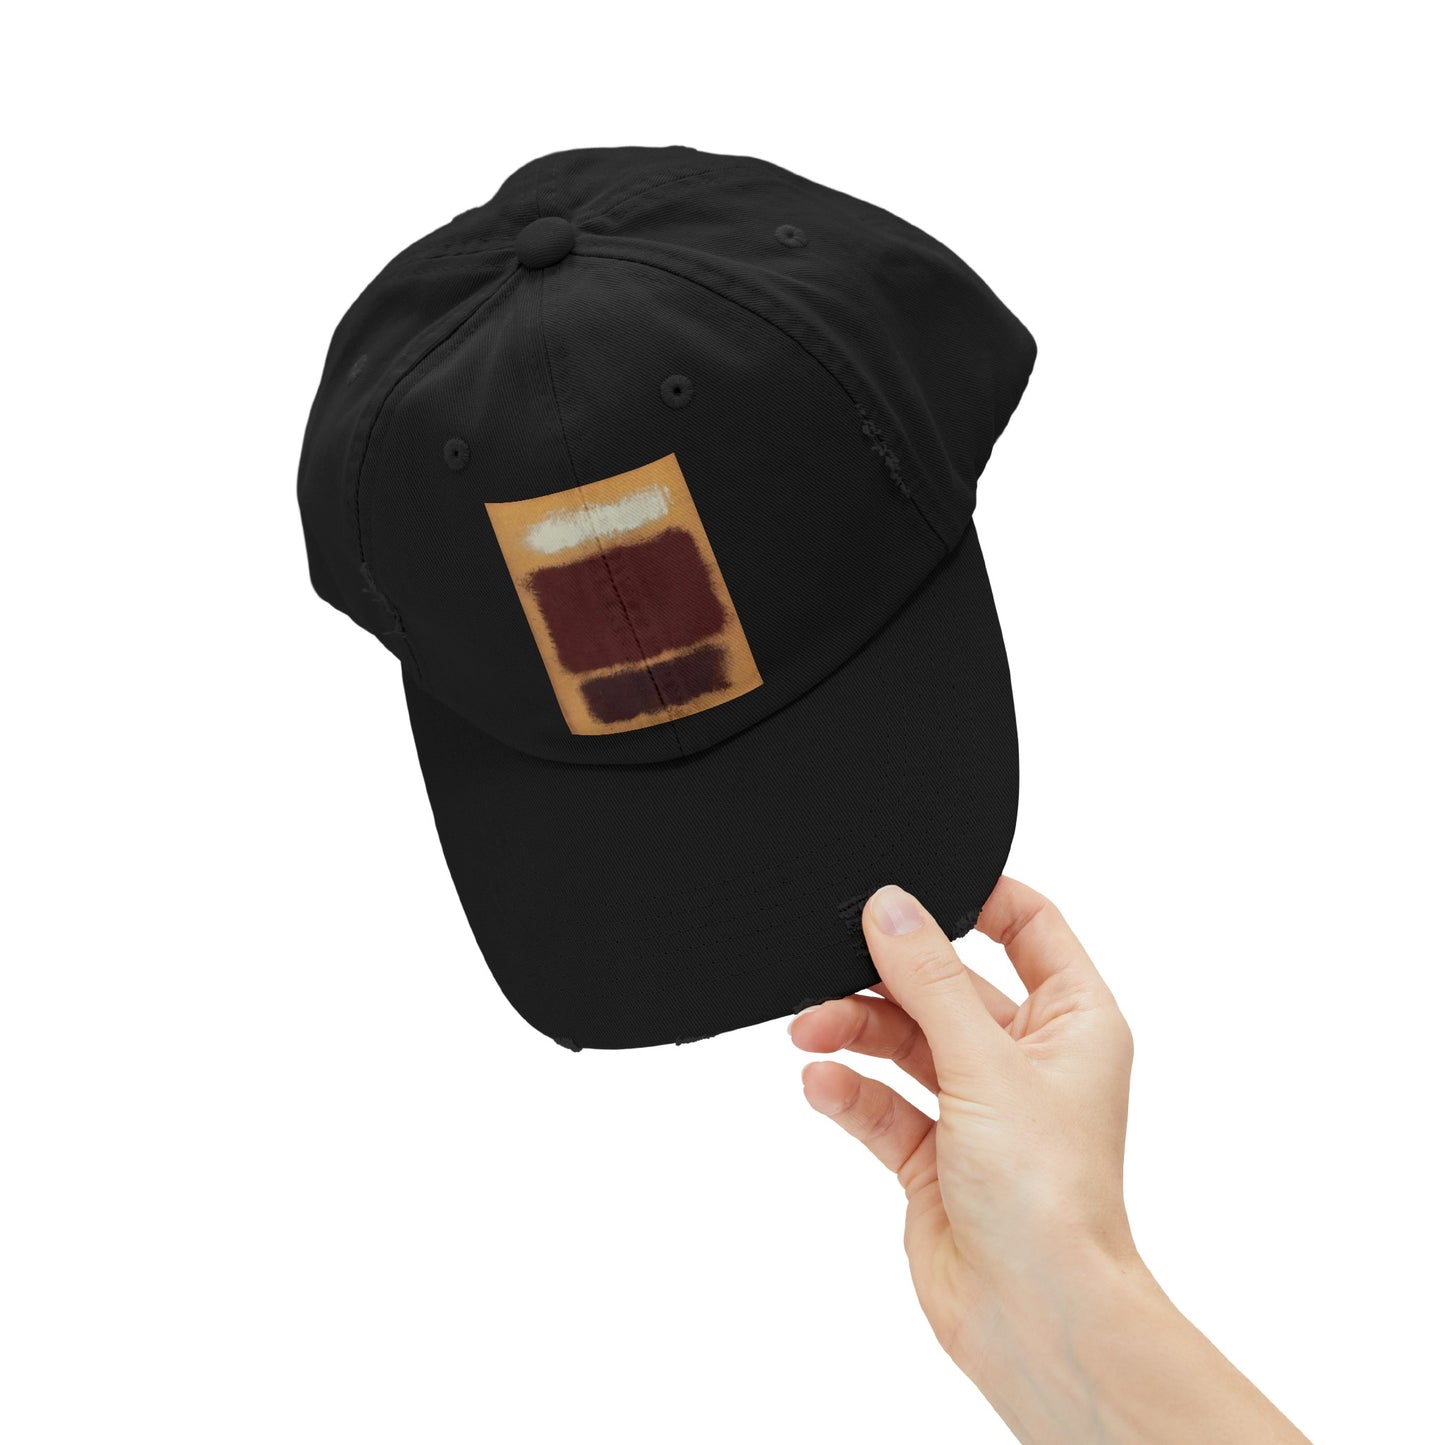 a hand holding a black hat with a patch on it